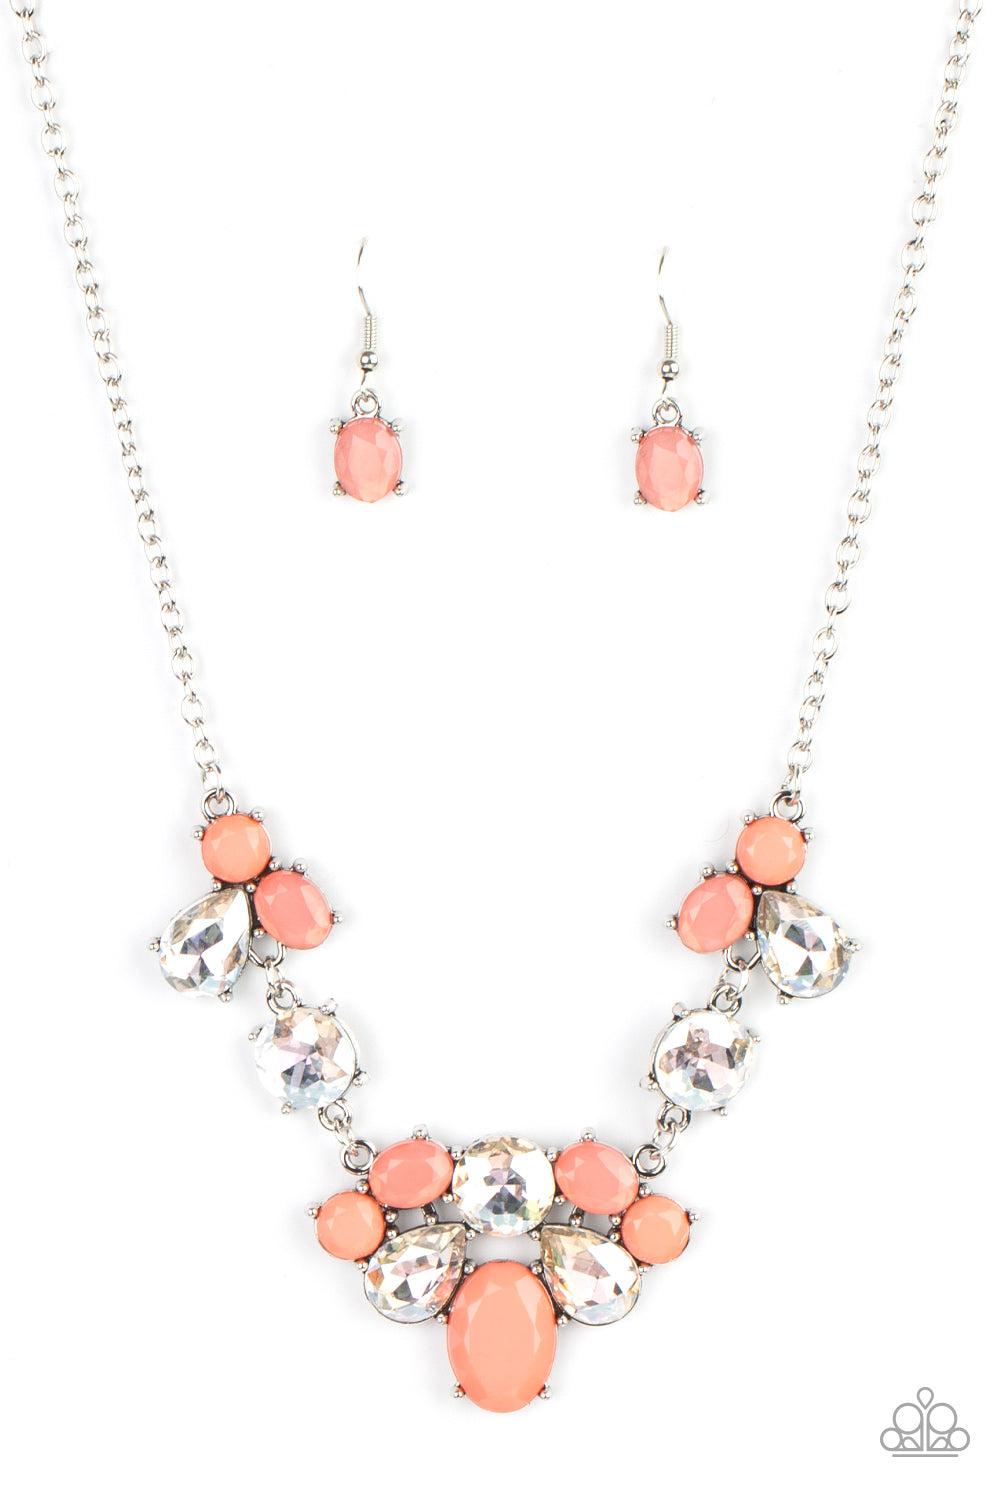 Ethereal Romance Coral and White Rhinestone Necklace - Paparazzi Accessories